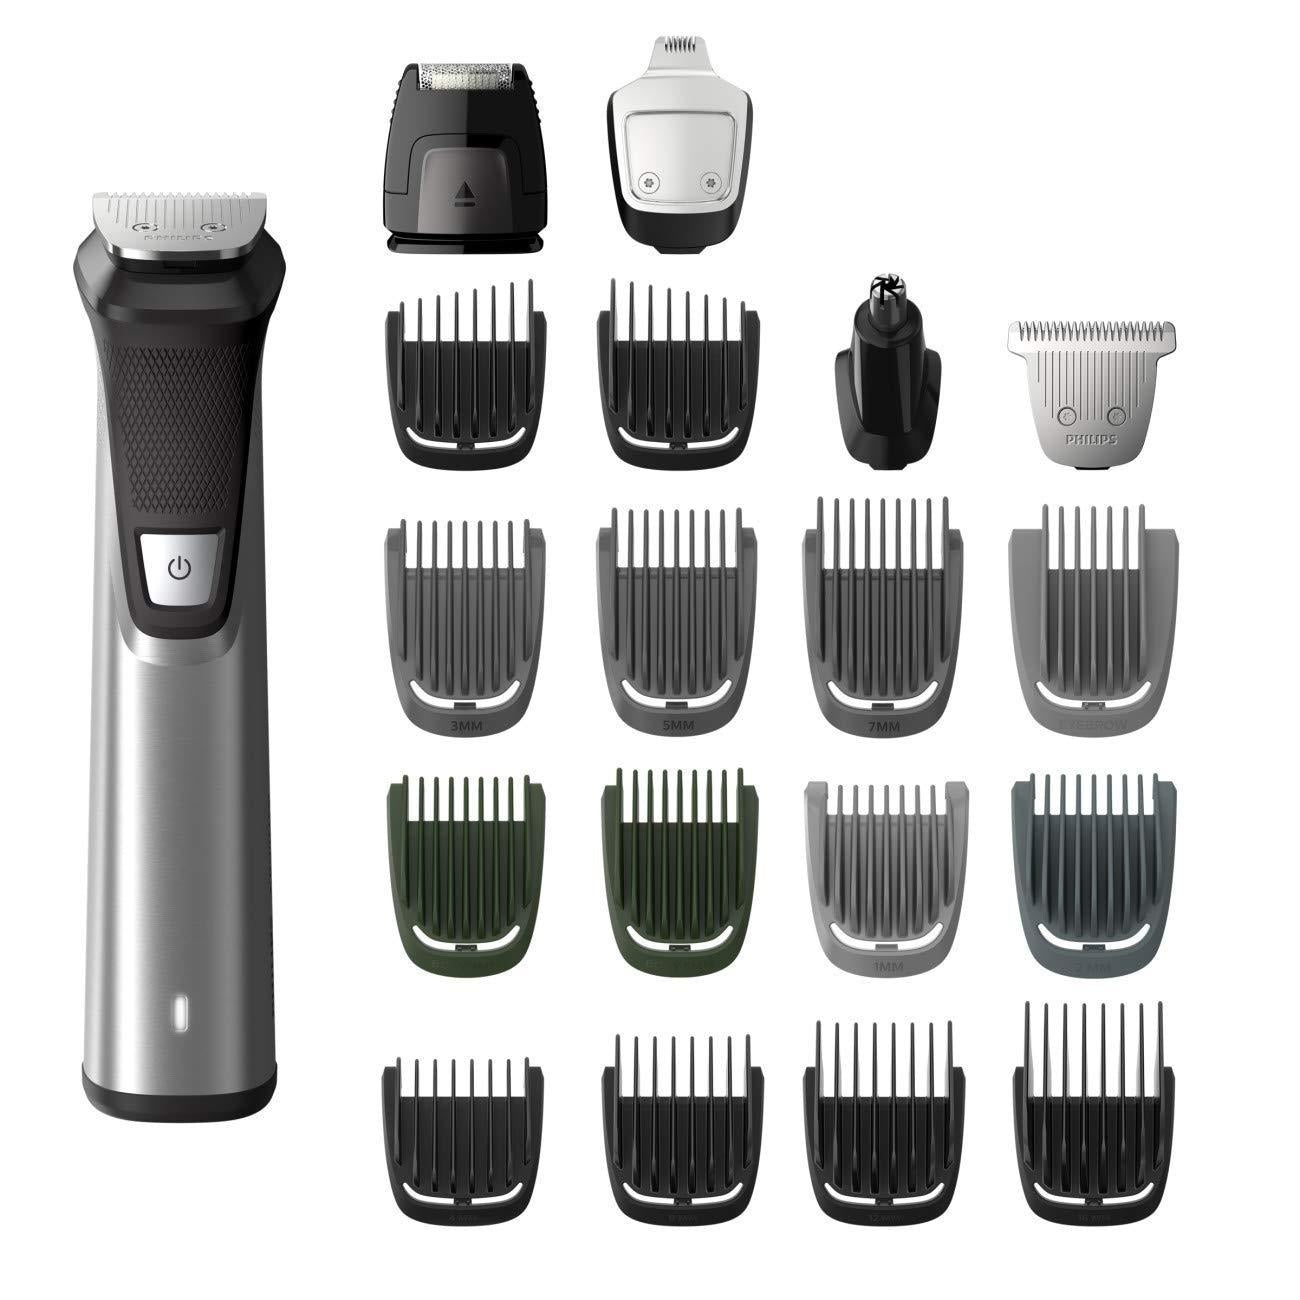 Philips Norelco MG7750/49 Multigroom 7000 Face Styler and Grooming Kit (23 Trimming Pieces, DualCut Technology)